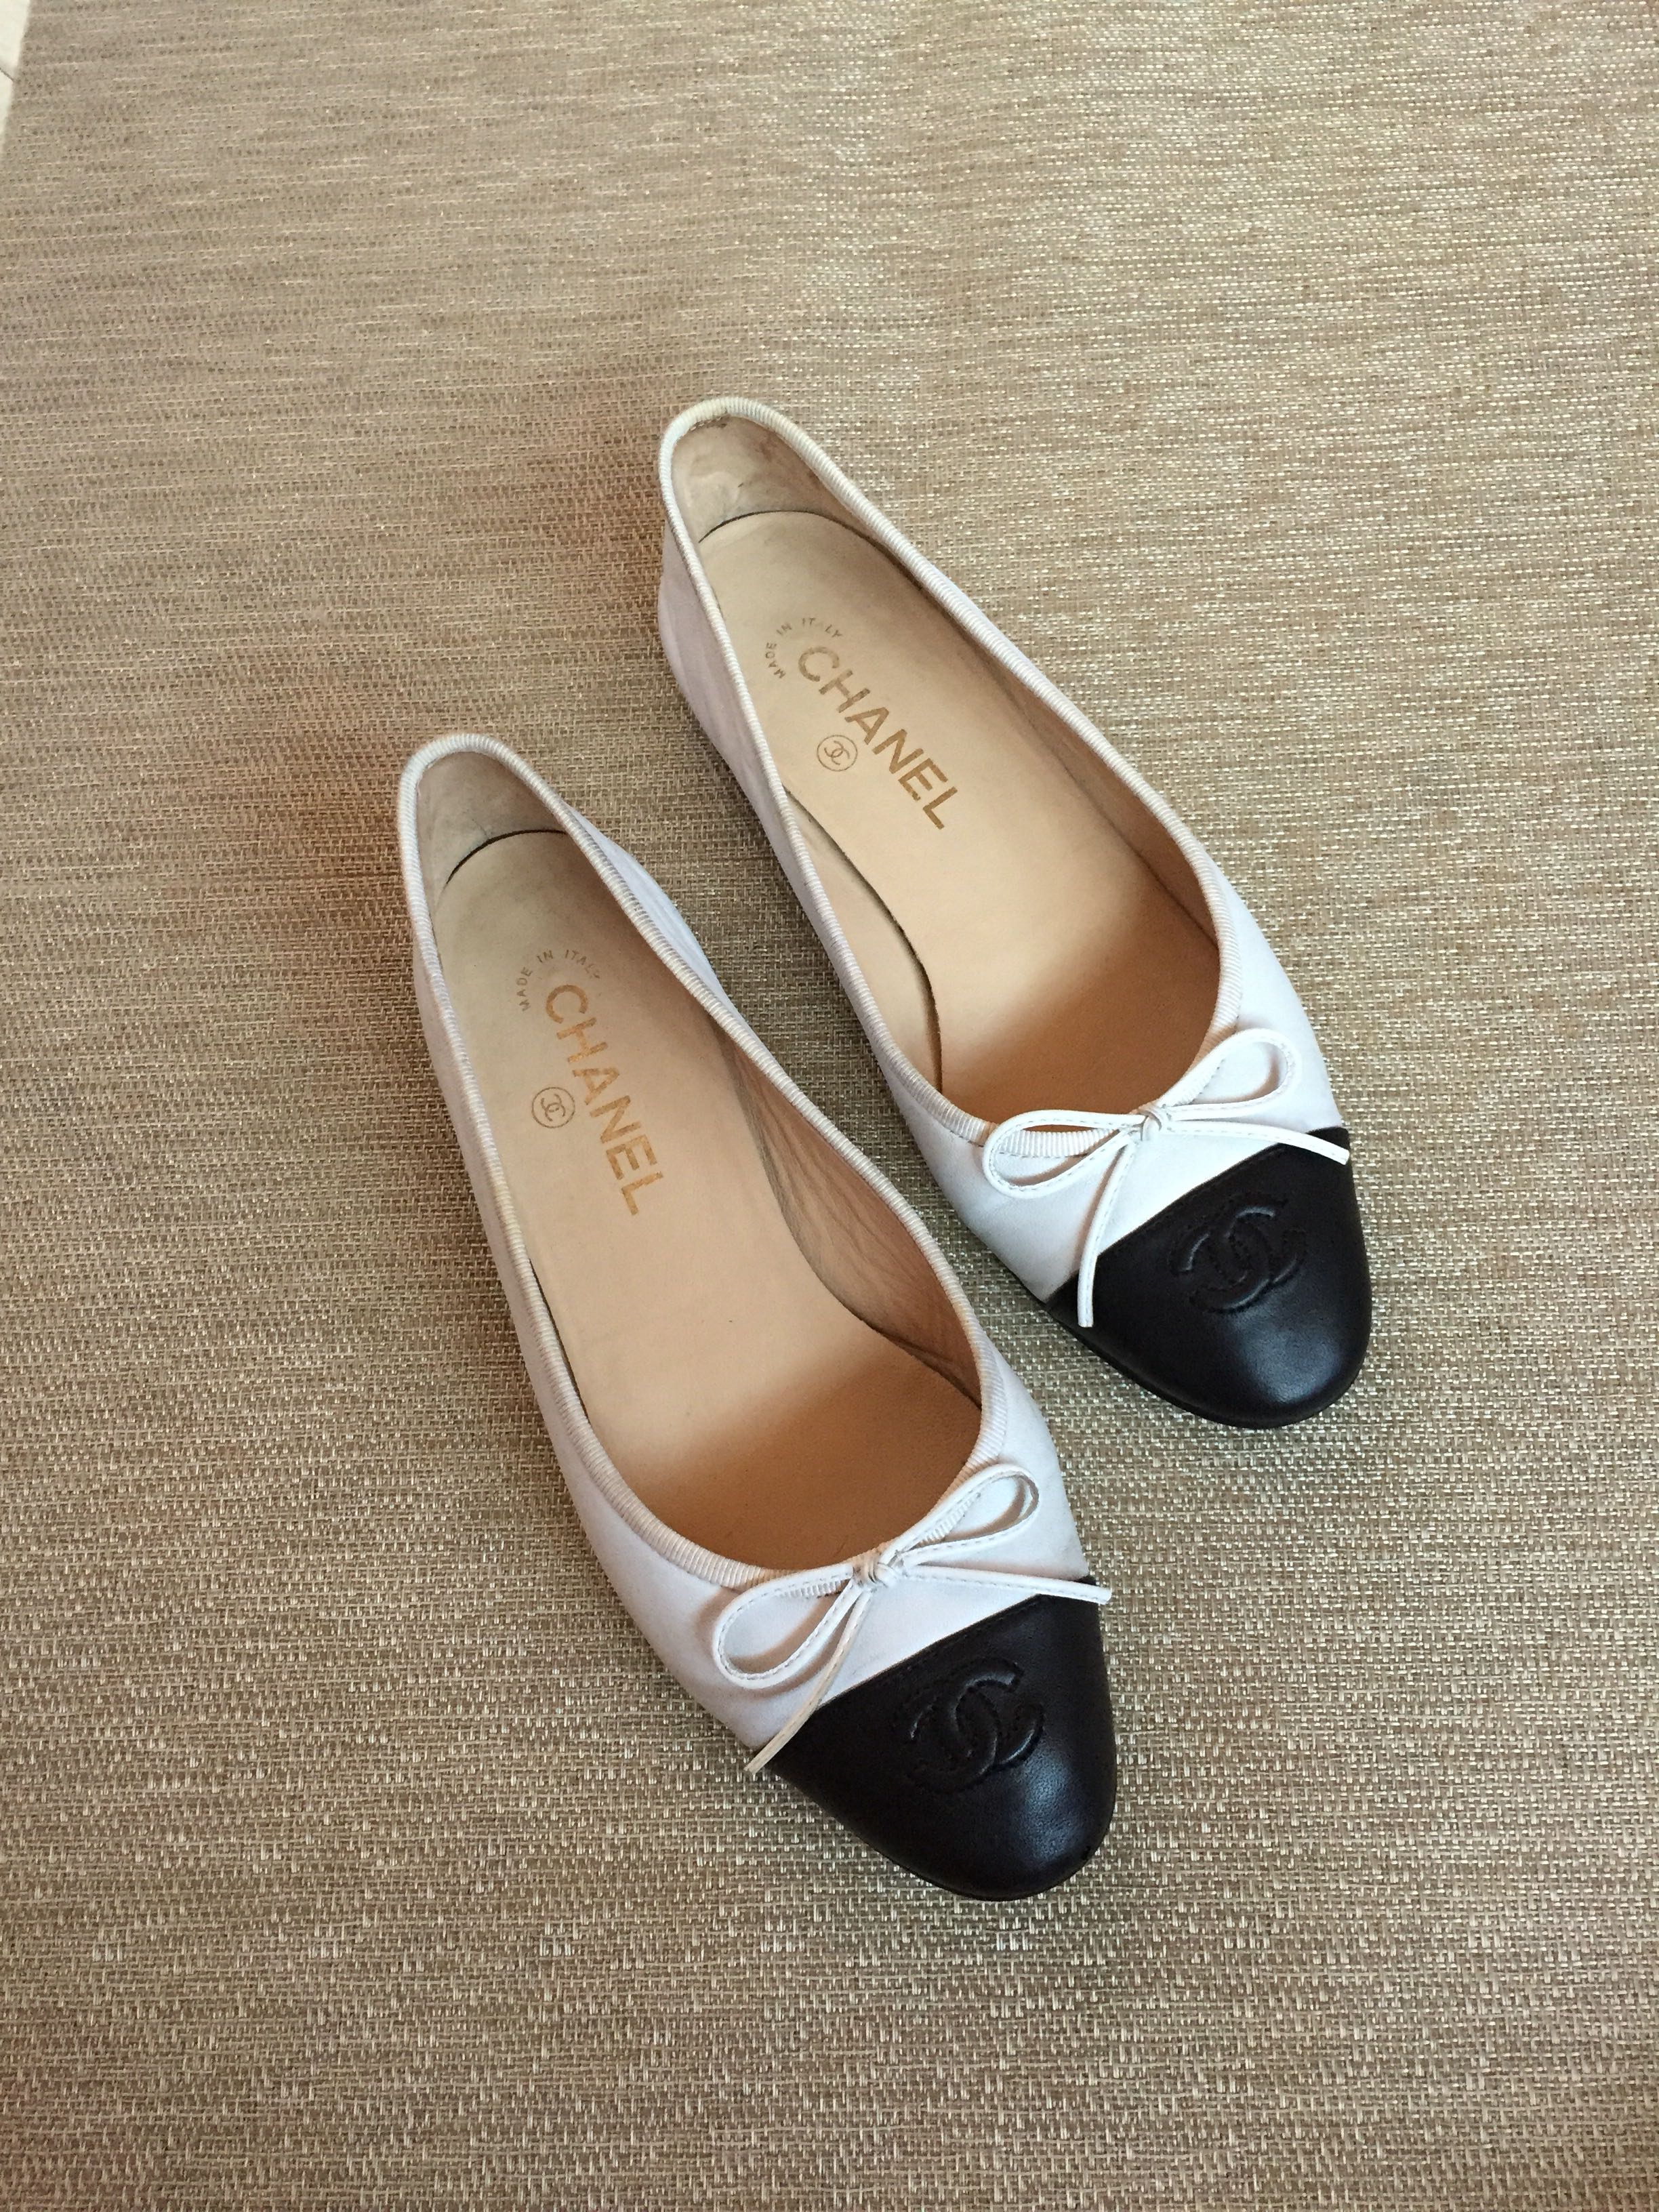 black and white ballerina shoes